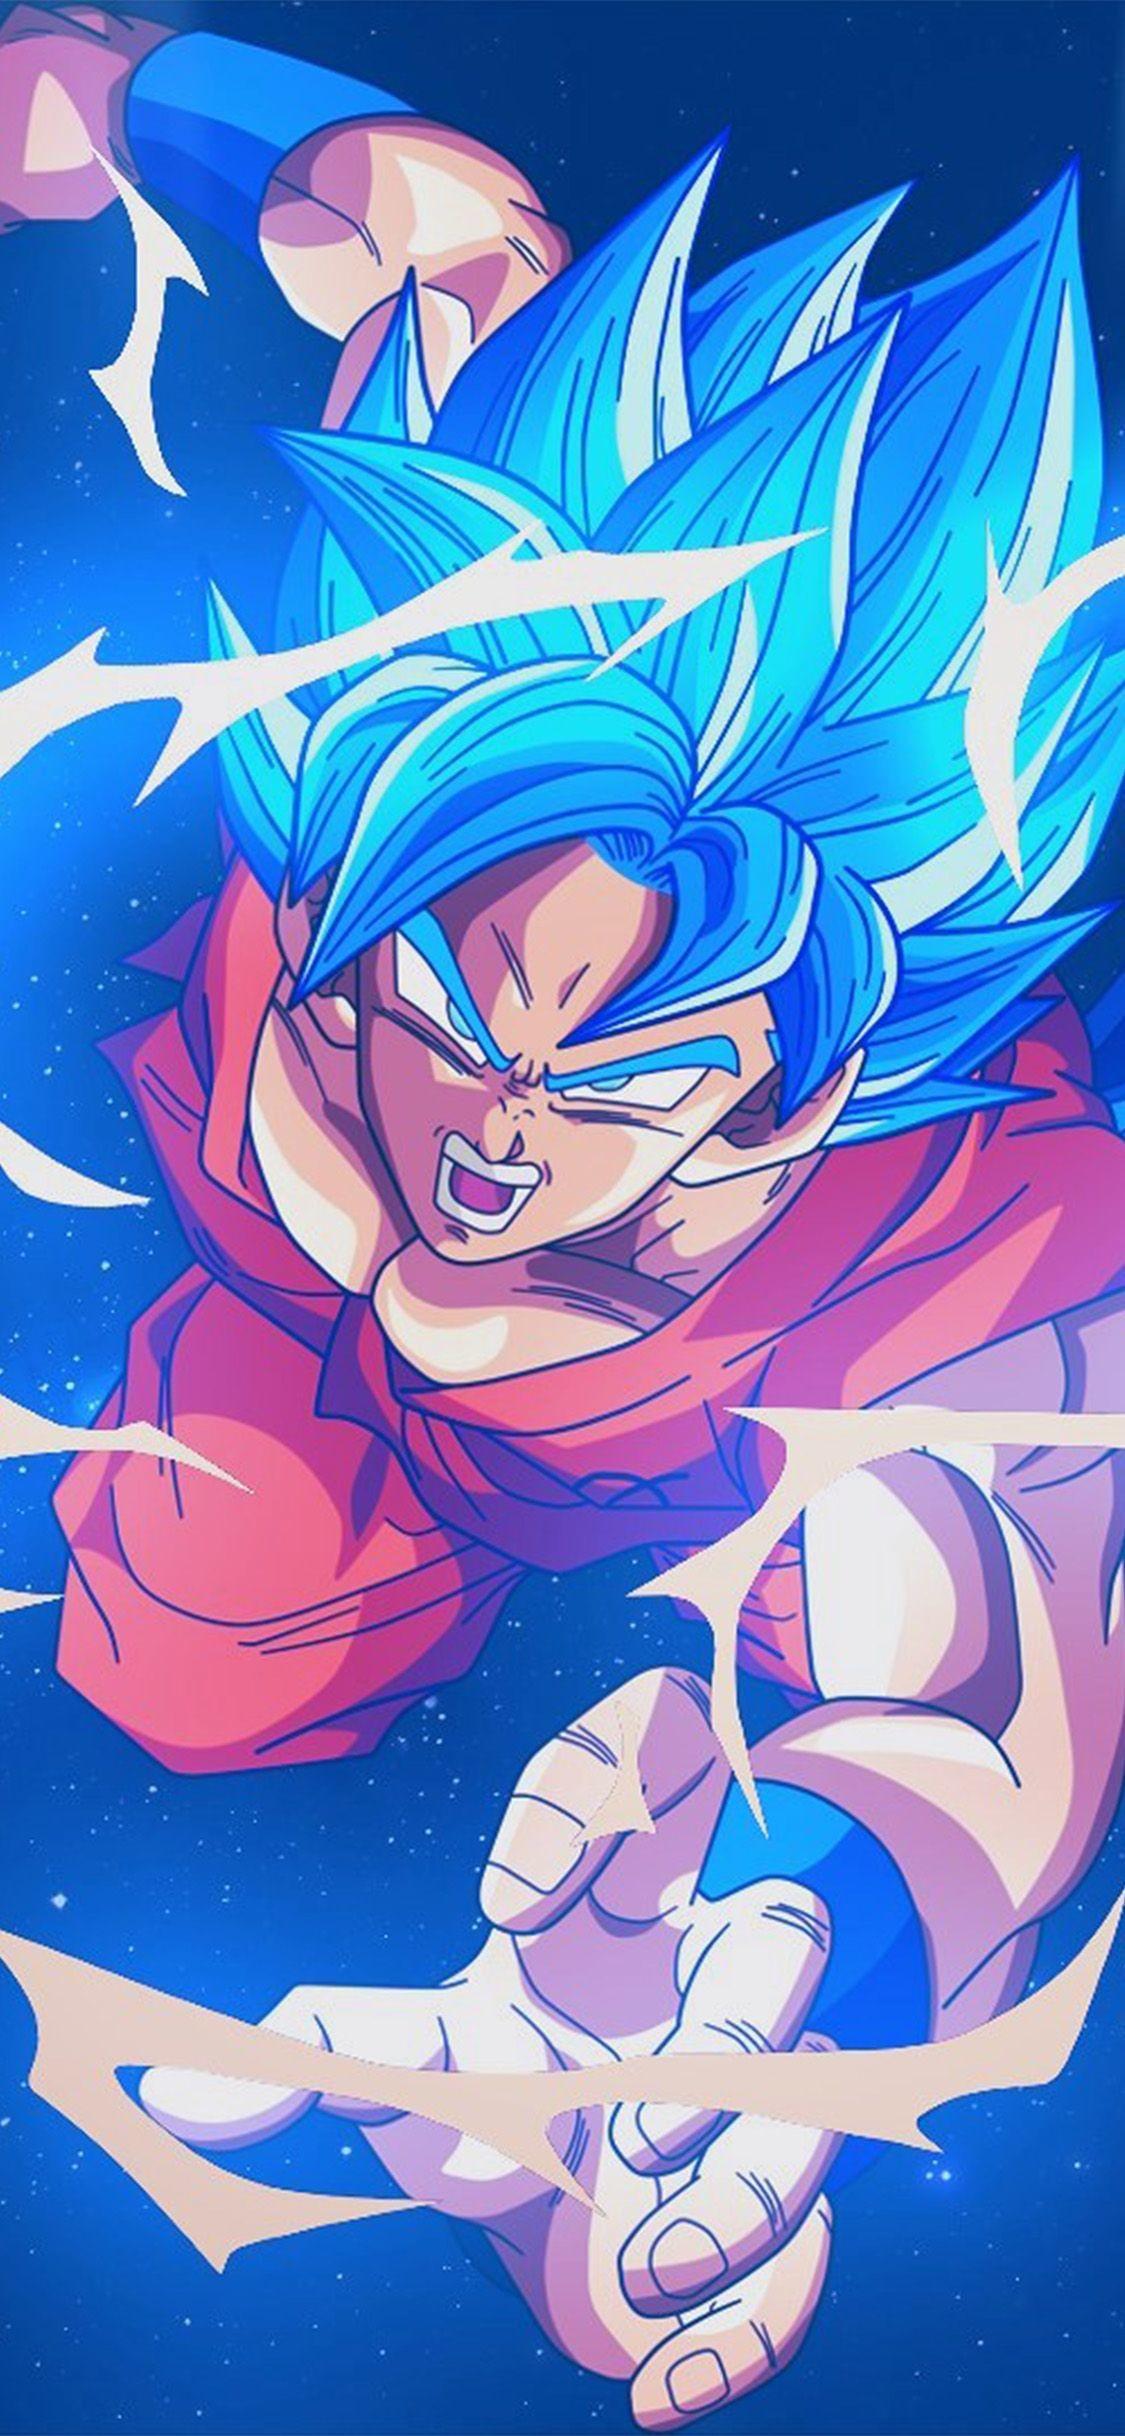 Download Wallpaper Anime Goku Wallpaper 4K Pictures - My Anime List